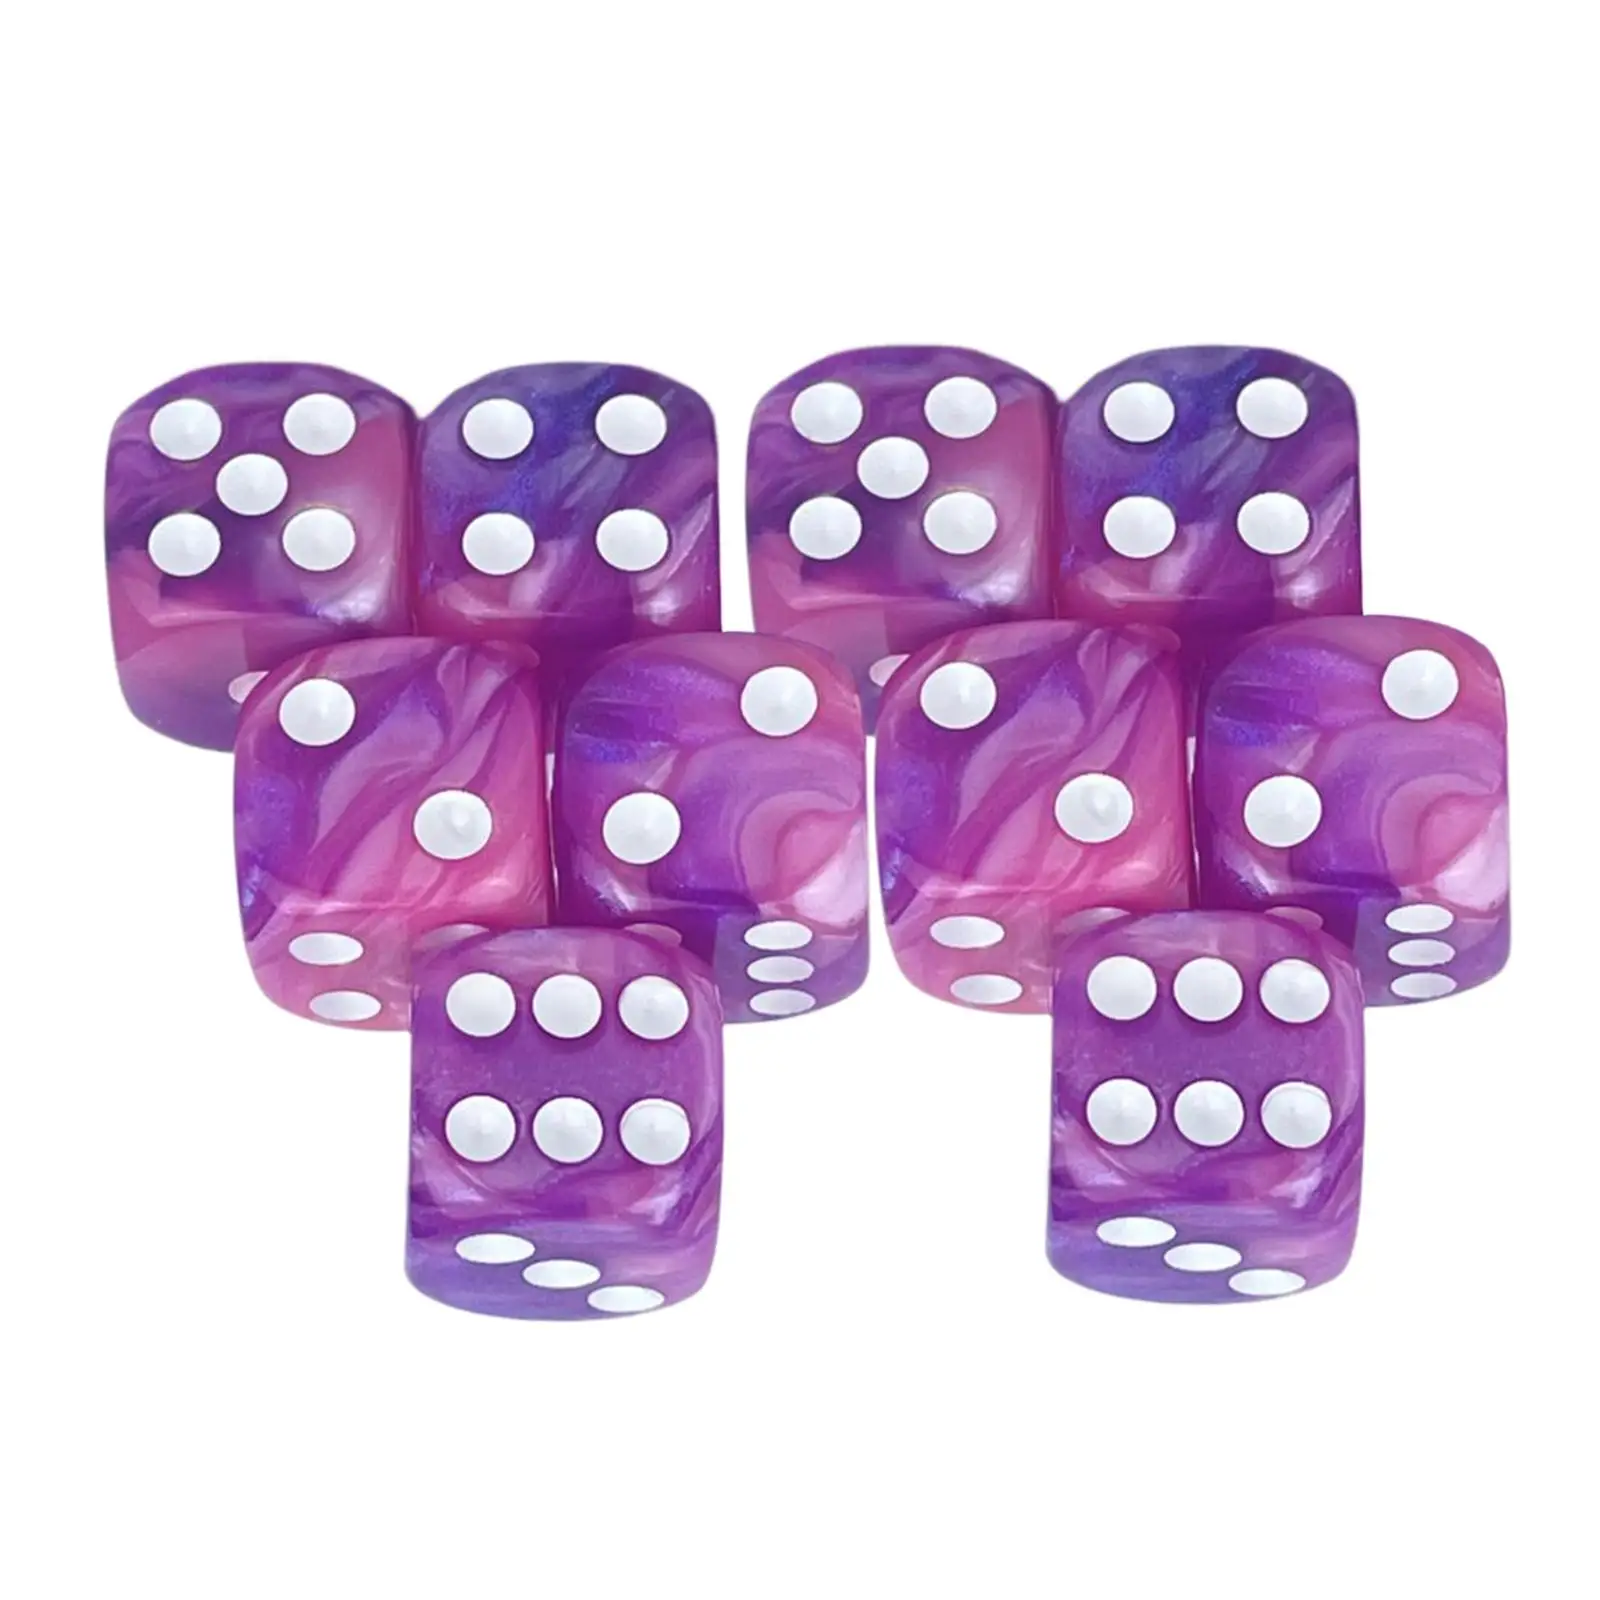 10x Acrylic D6 Dices Set Family Table Game 16mm Polyhedral Dices for Party Party Favors Family Gathering Kids